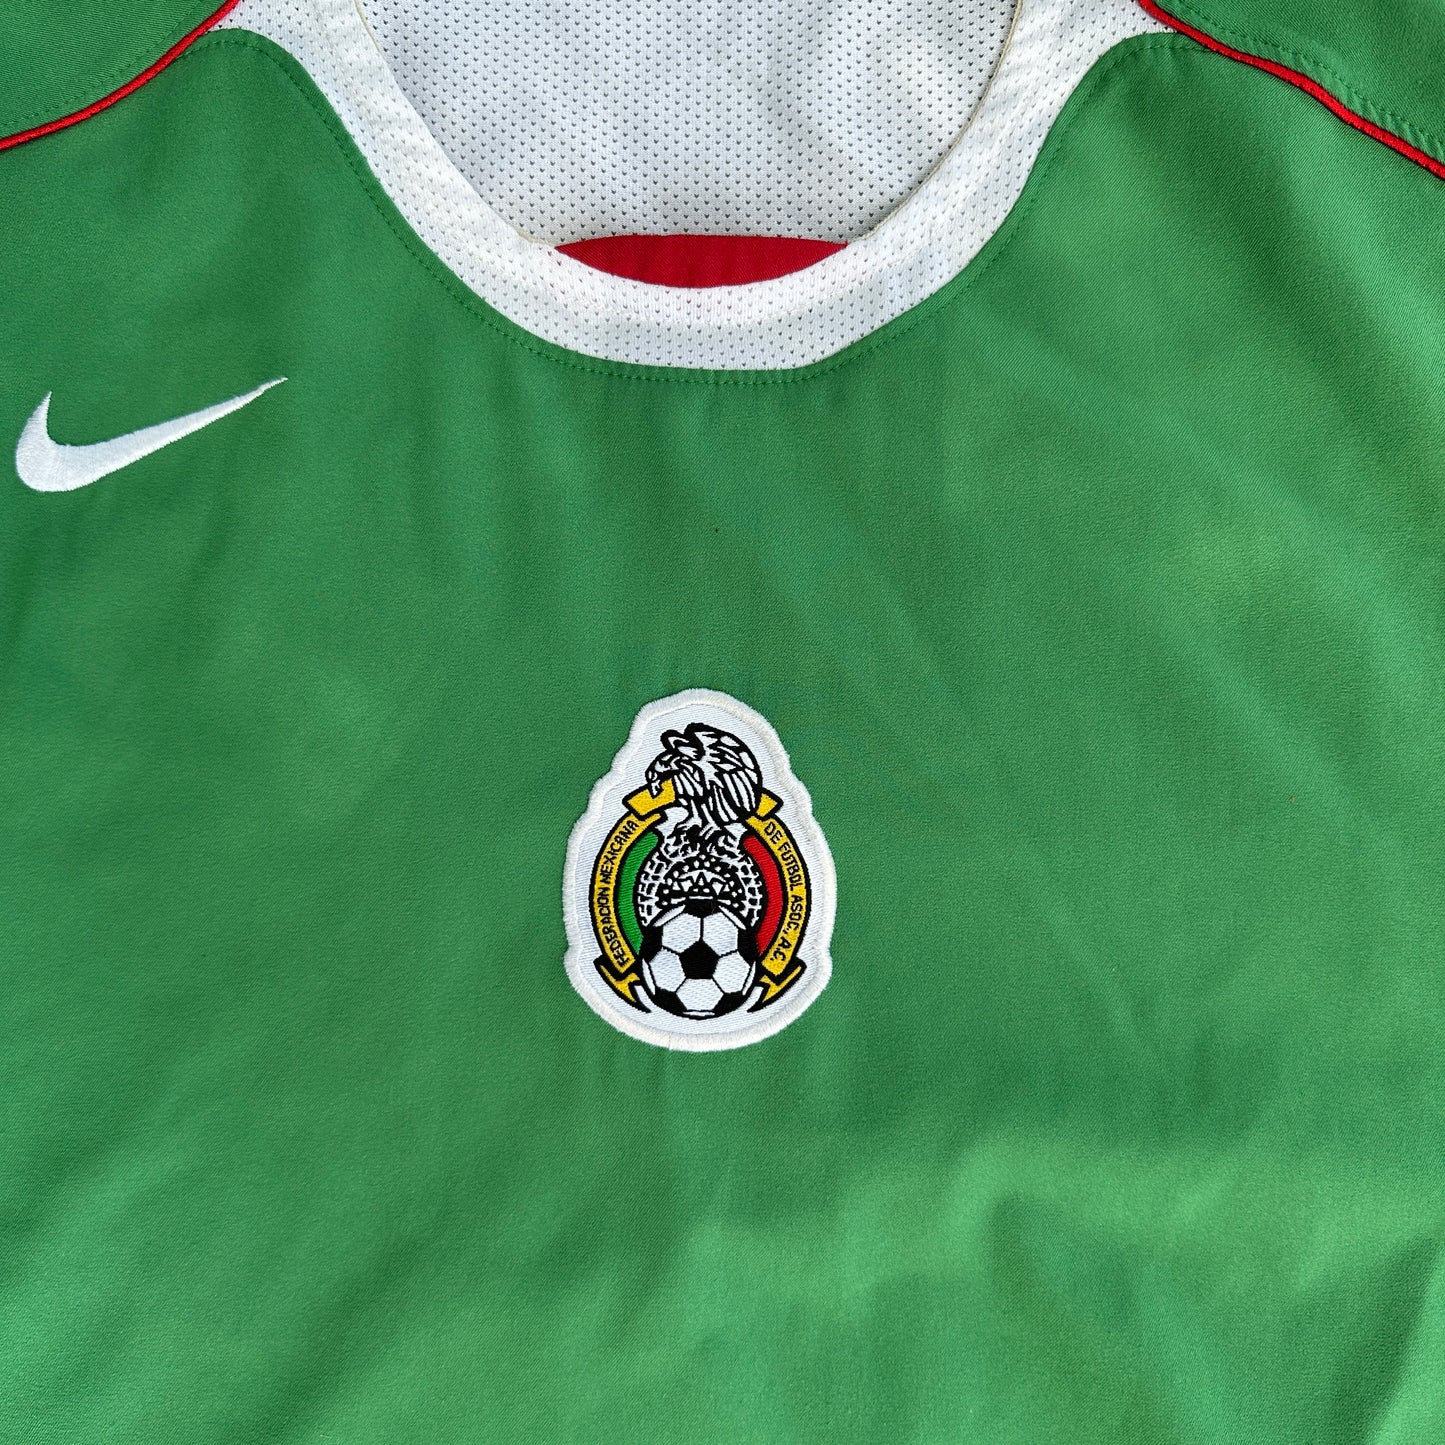 Mexico 2005 x Nike home jersey